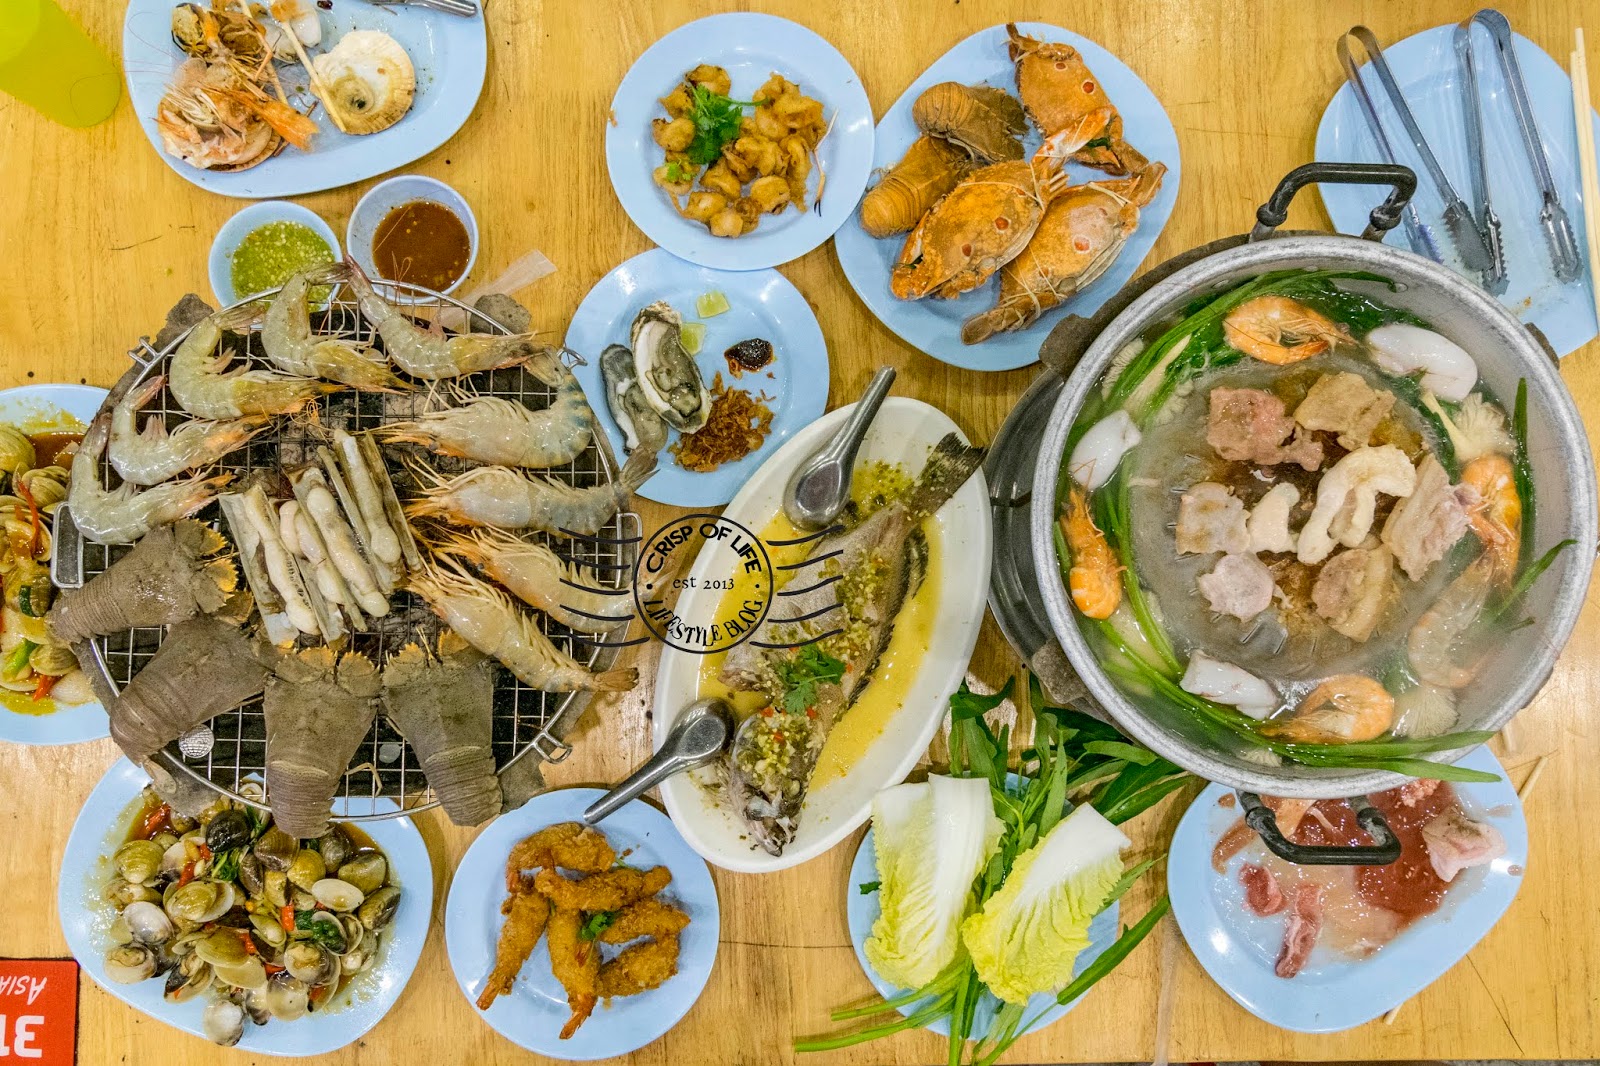 Eat All You Can Asia Seafood Buffet + Mookata + Ala Carte For 388 Thai Baht Only